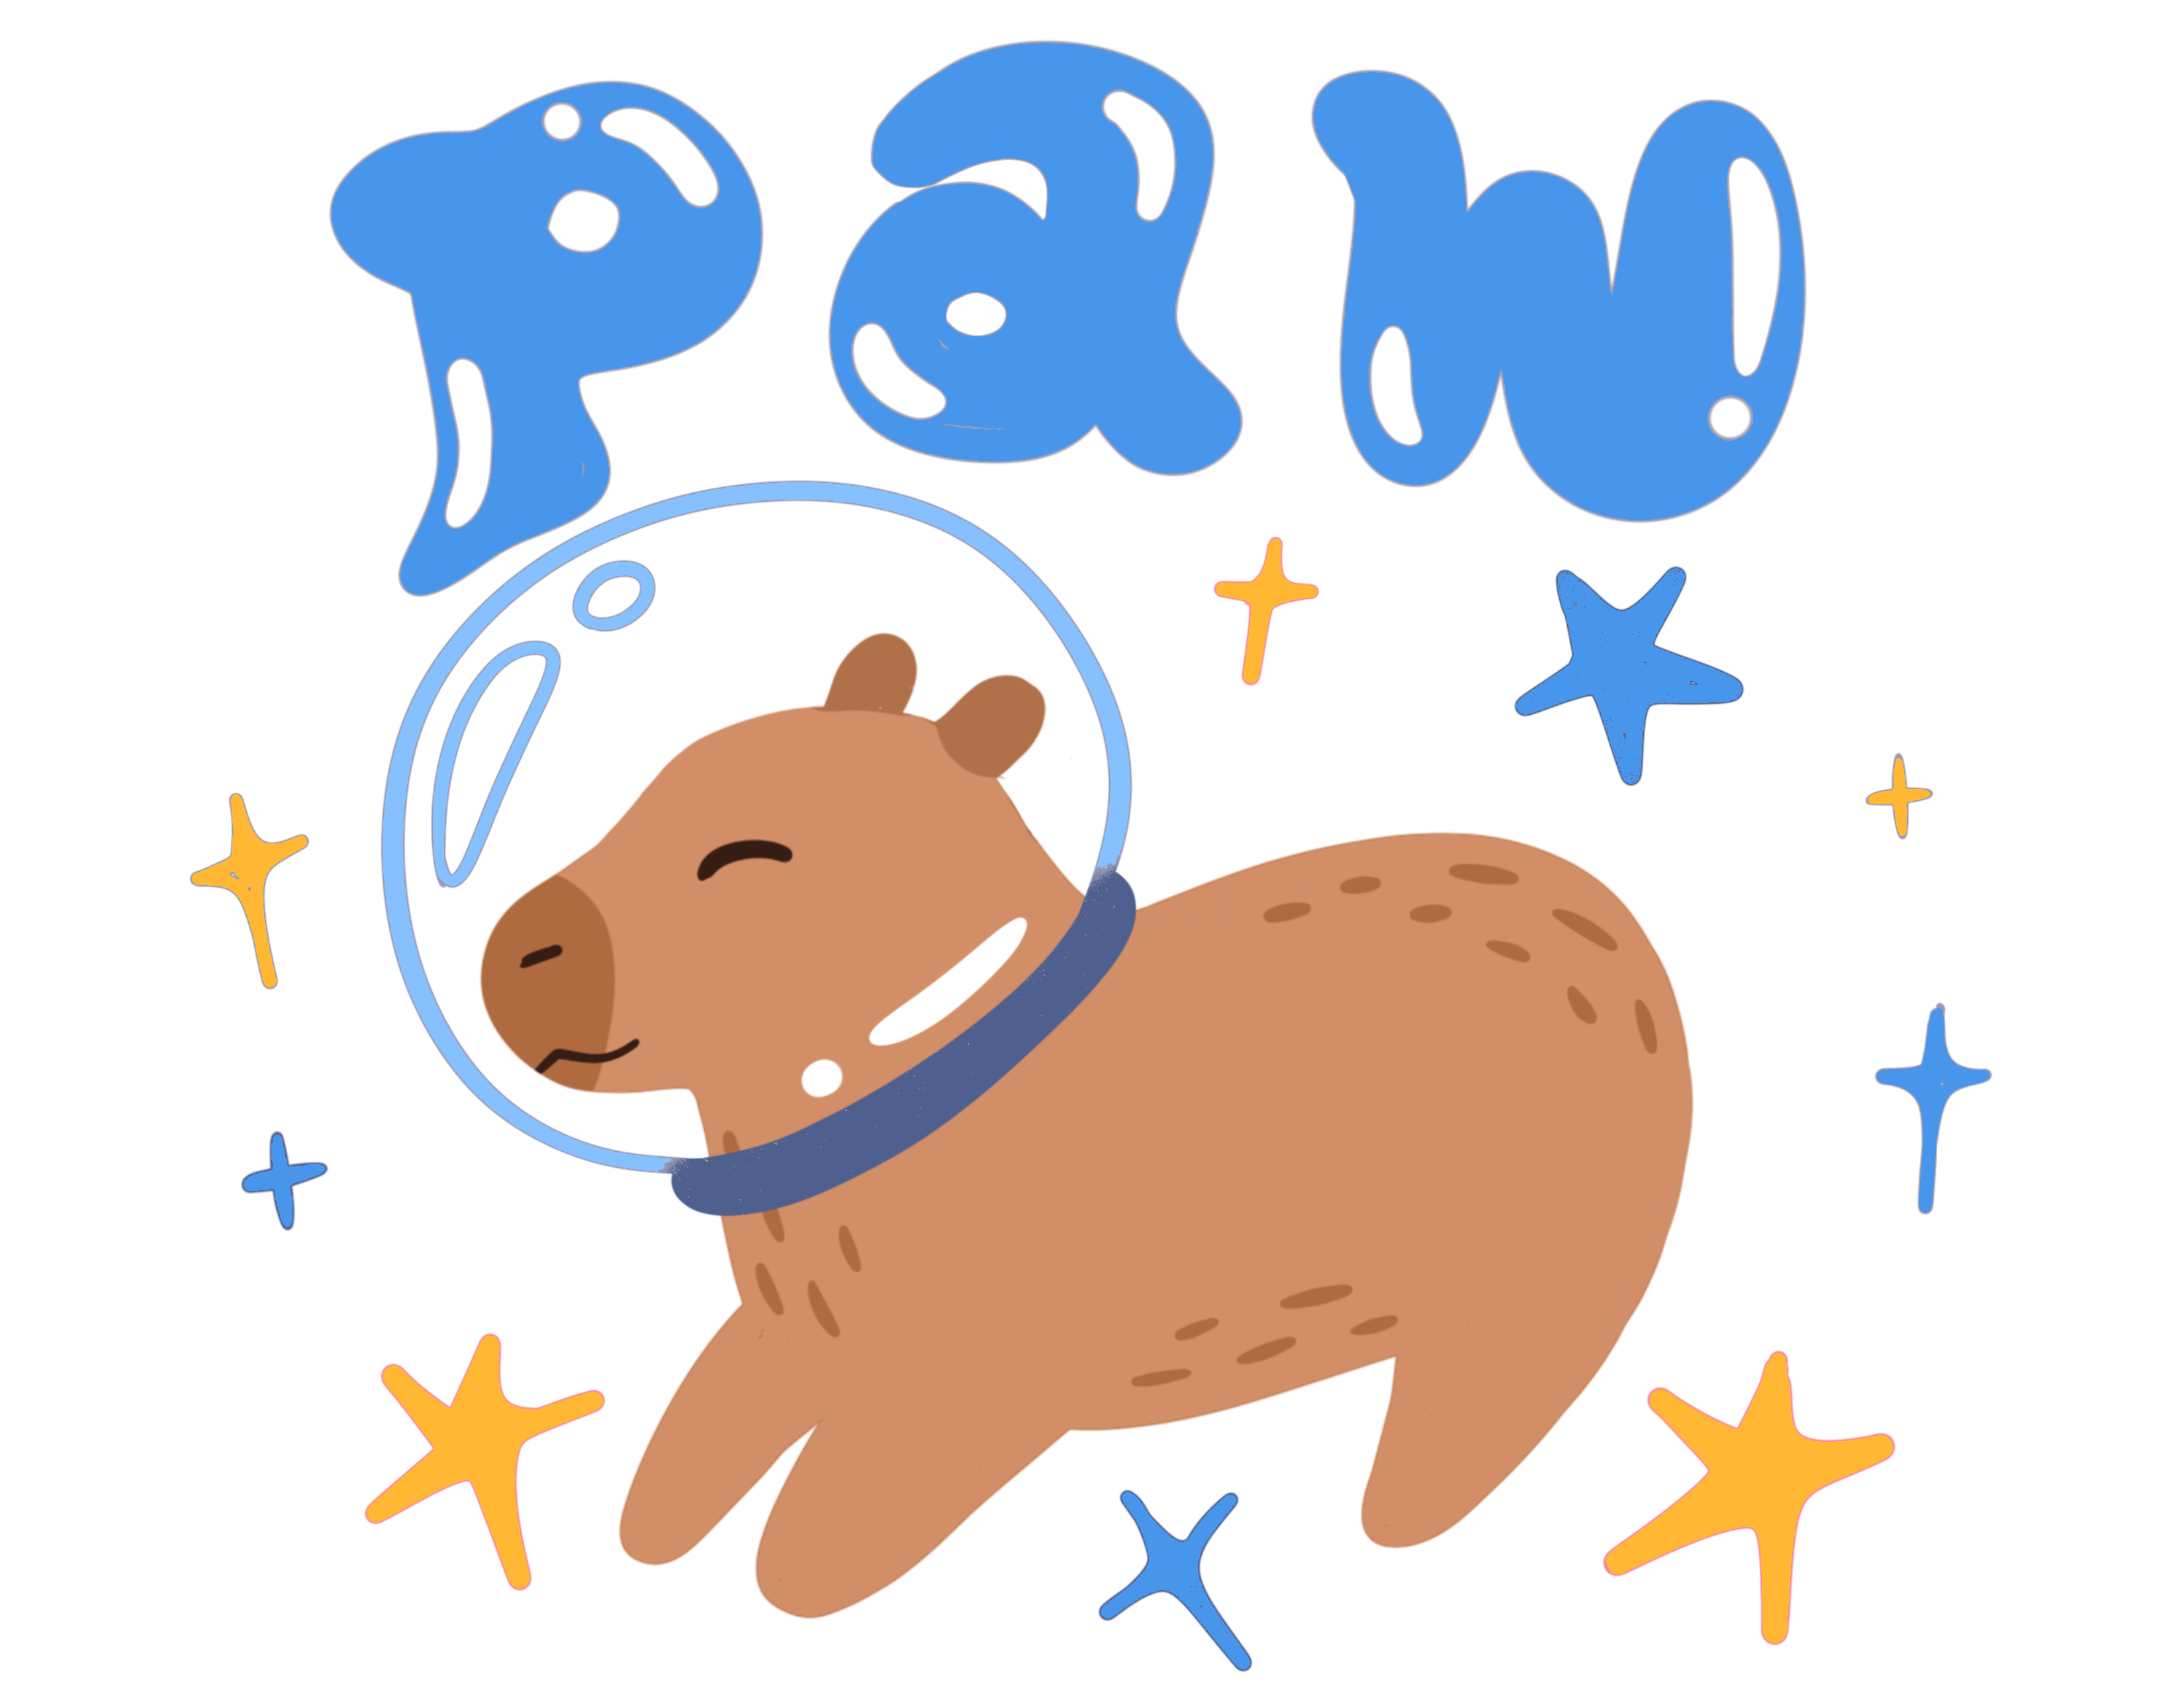 A digital illustration of a capybara with an astronaut hat on. Blue and yellow stars surround the capybara. At the top of the image is the text "paw."